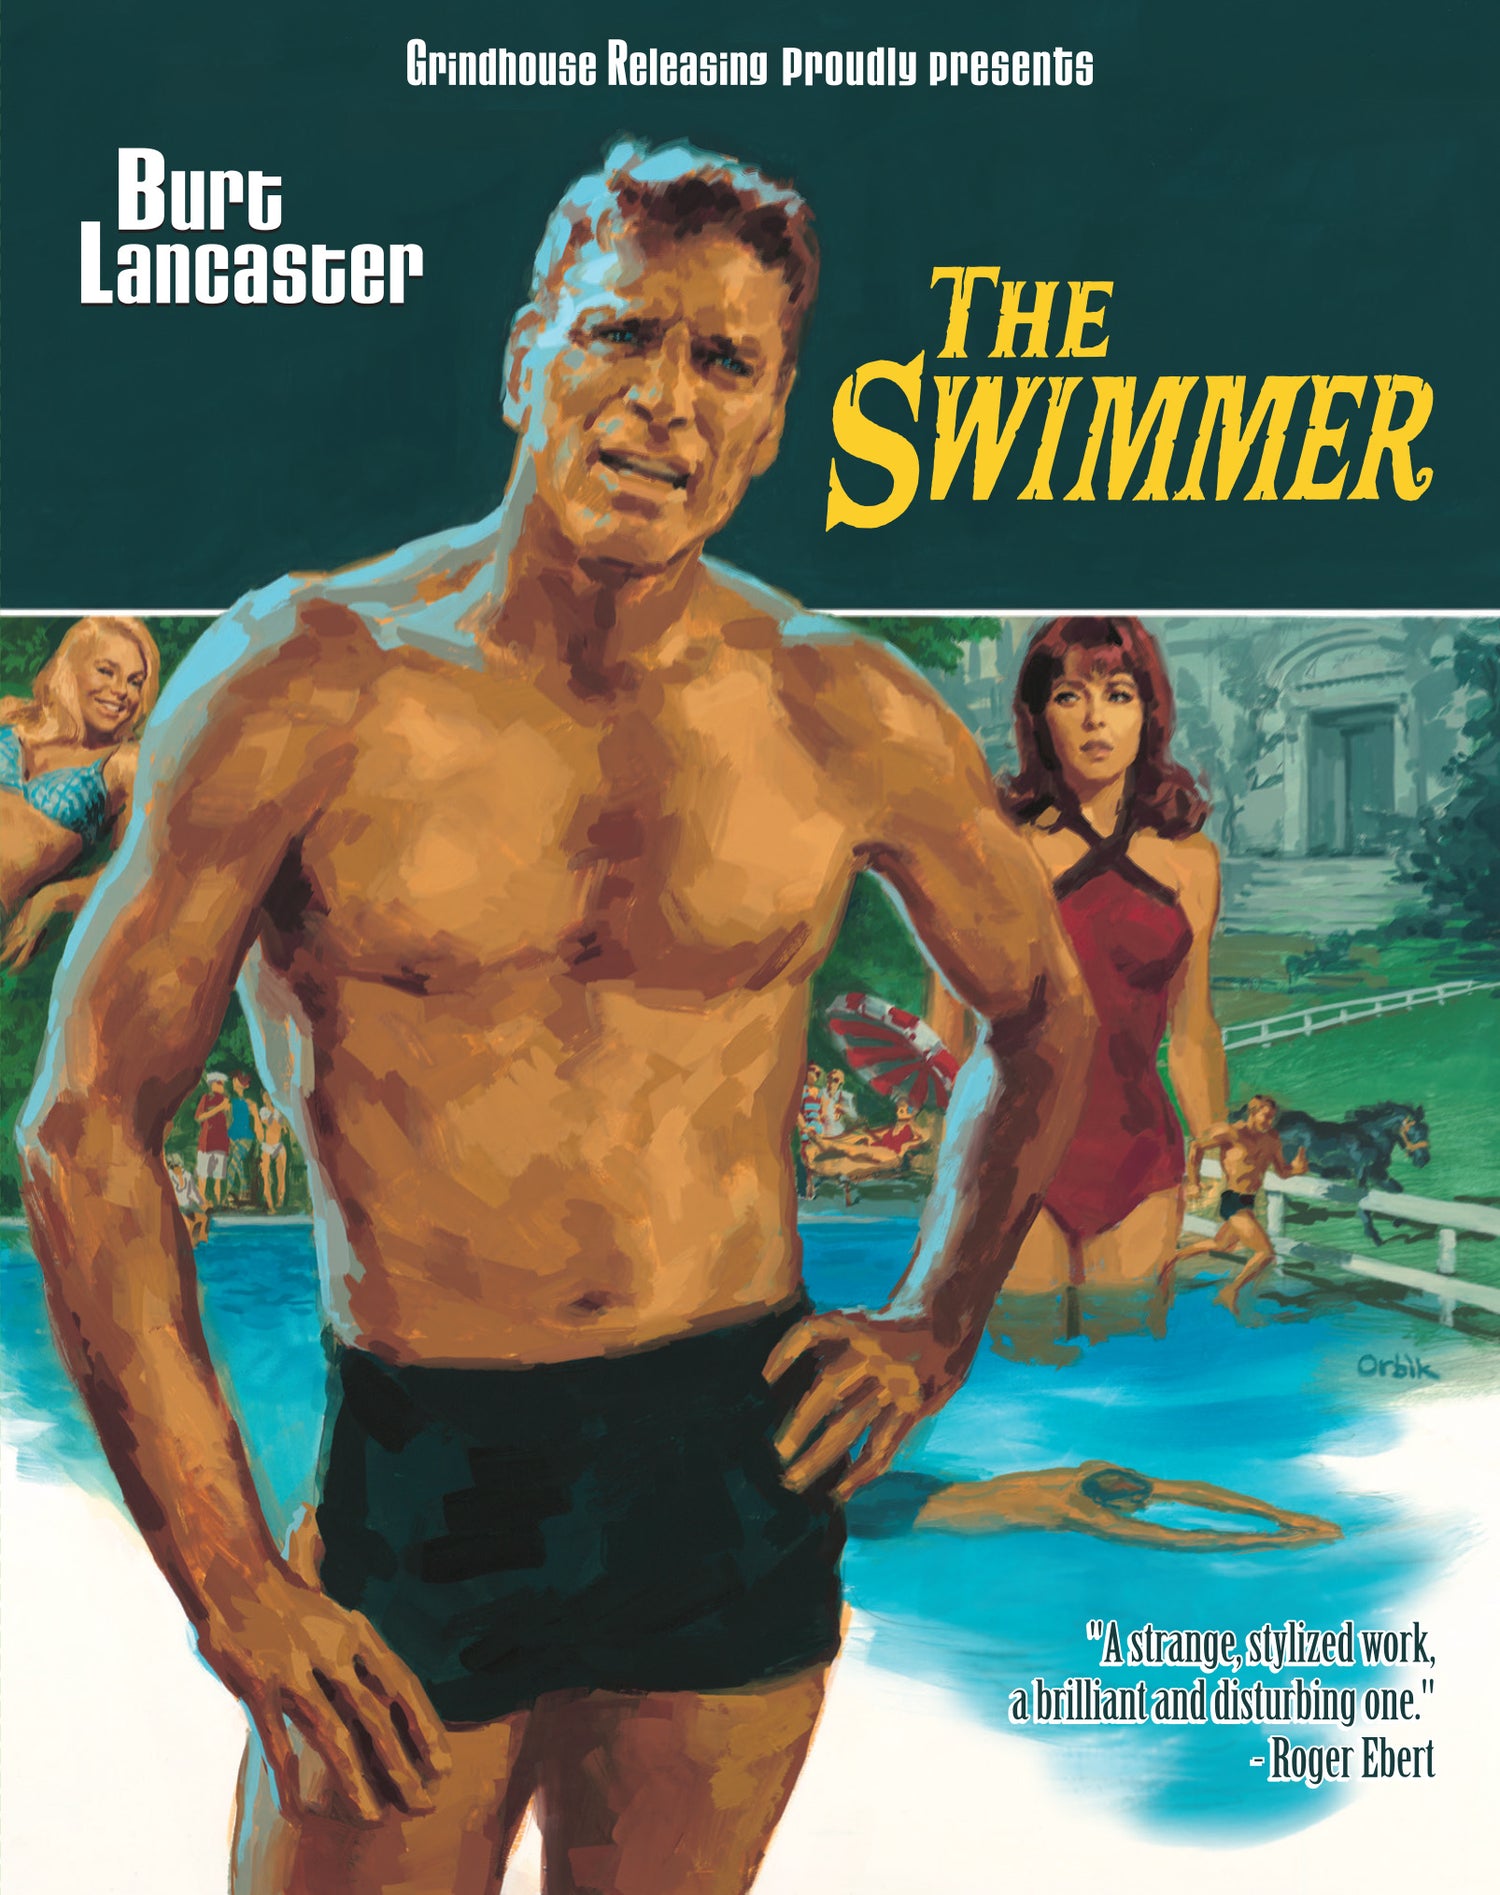 THE SWIMMER (1968)